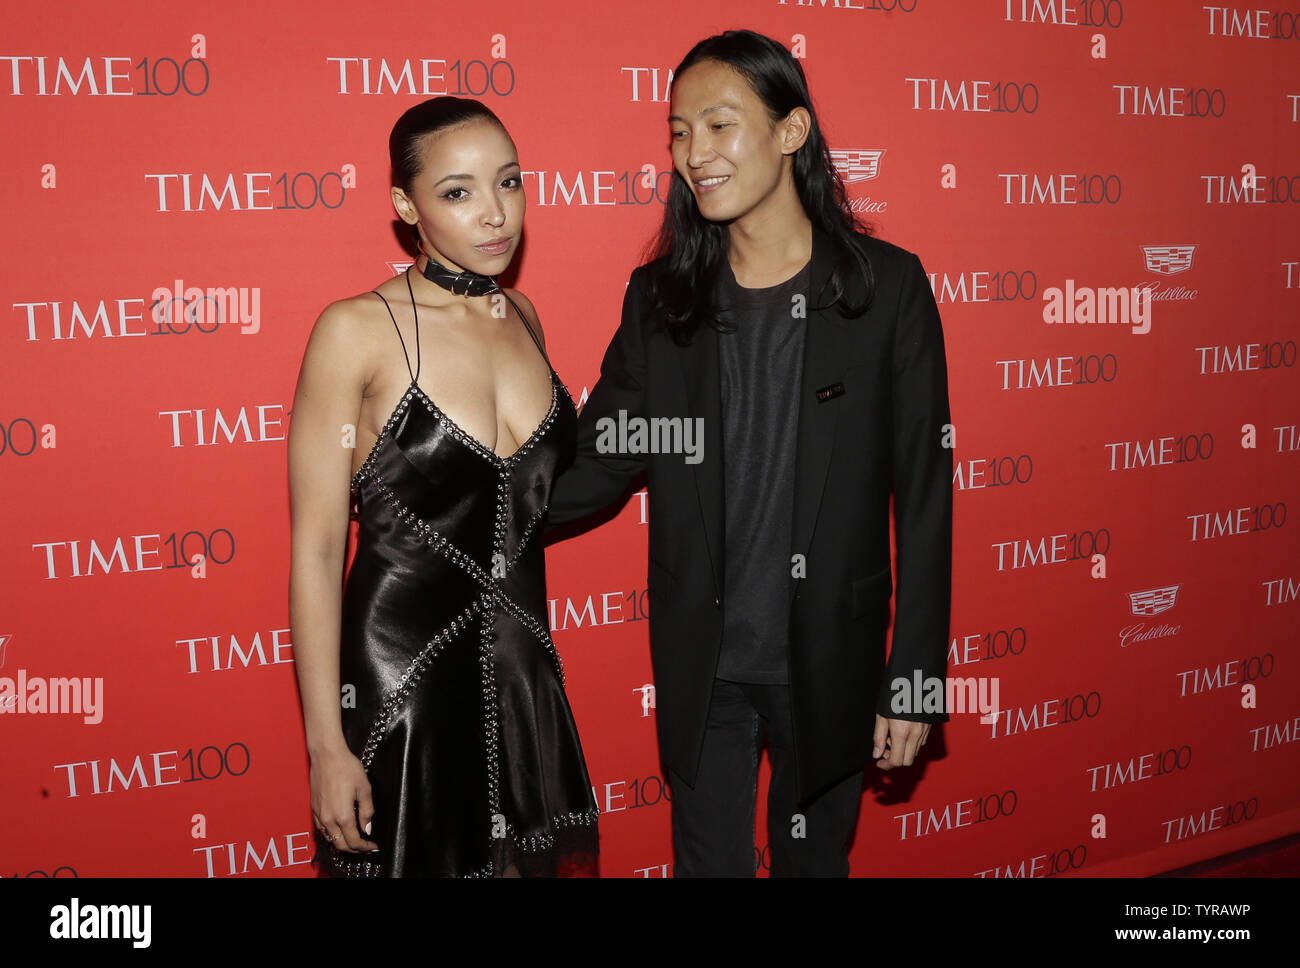 Alexander Wang and Tinashe arrive on the red carpet at the TIME 100 Gala at Frederick P. Rose Hall, Home of Jazz at Lincoln Center, in New York City on April 26, 2016. TIME 100 celebrates TIME's list of the 100 Most Influential People in the World.   Photo by John Angelillo/UPI Stock Photo